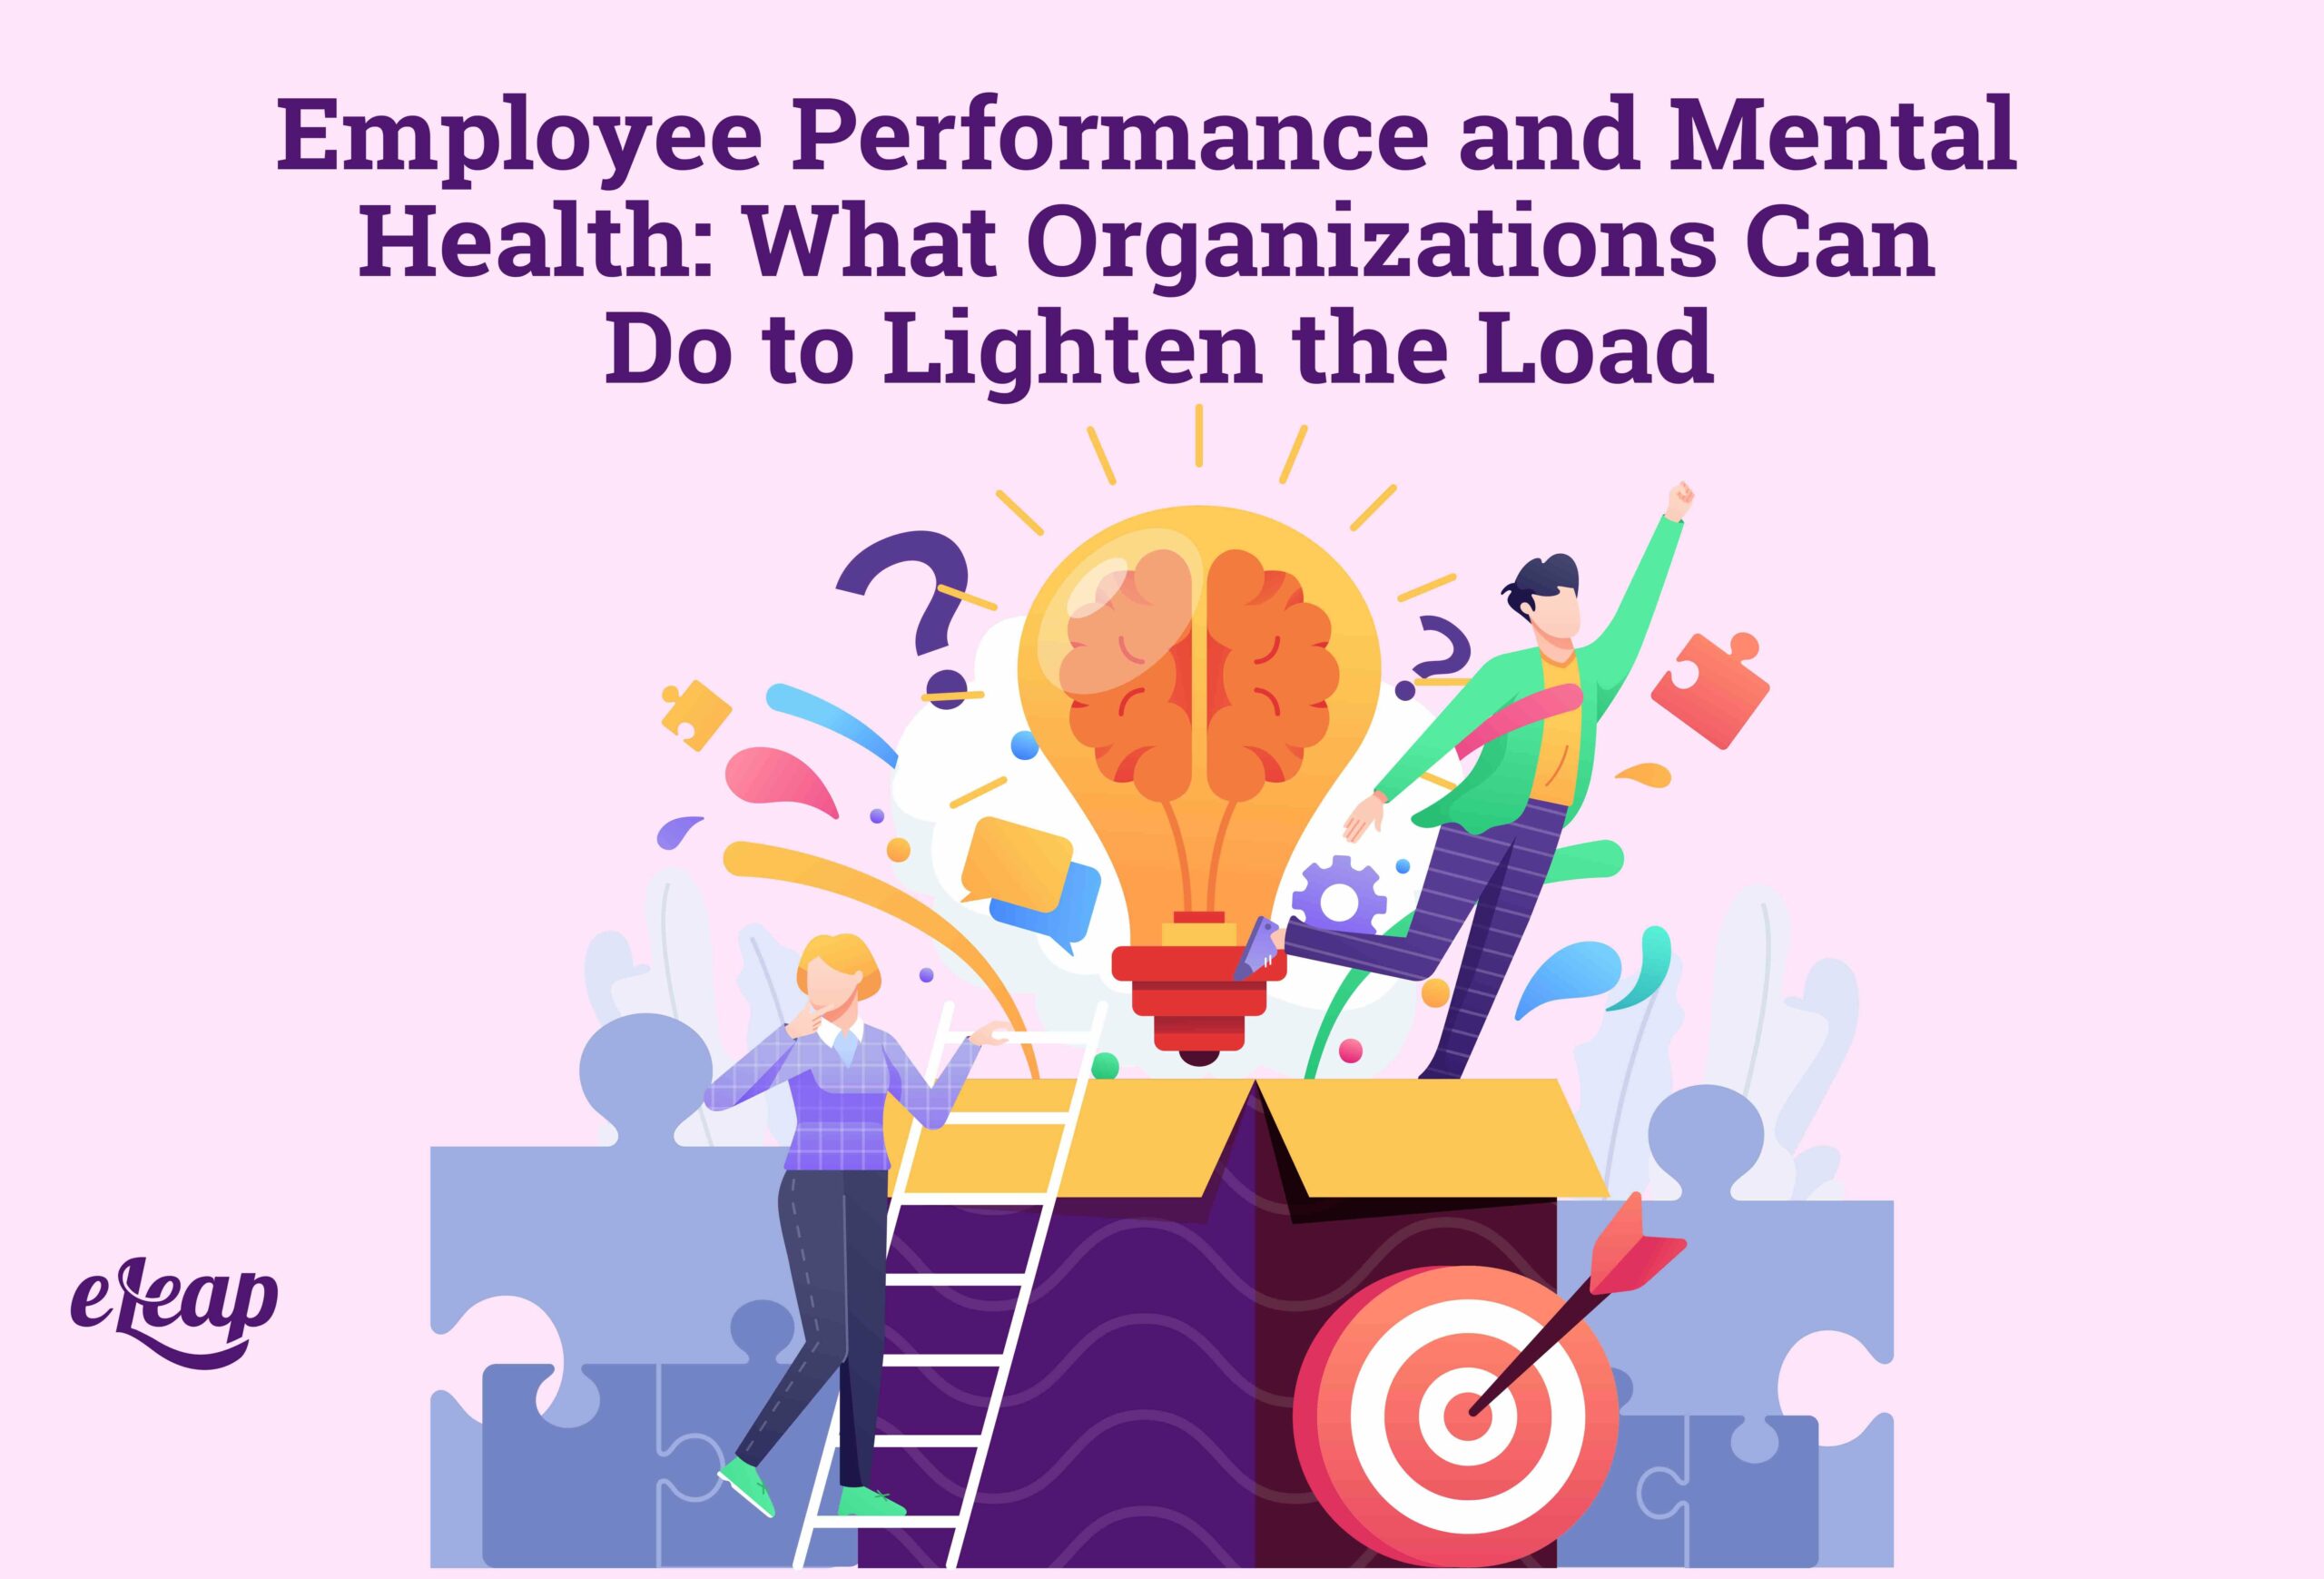 Employee Performance and Mental Health: What Organizations Can Do to Lighten the Load